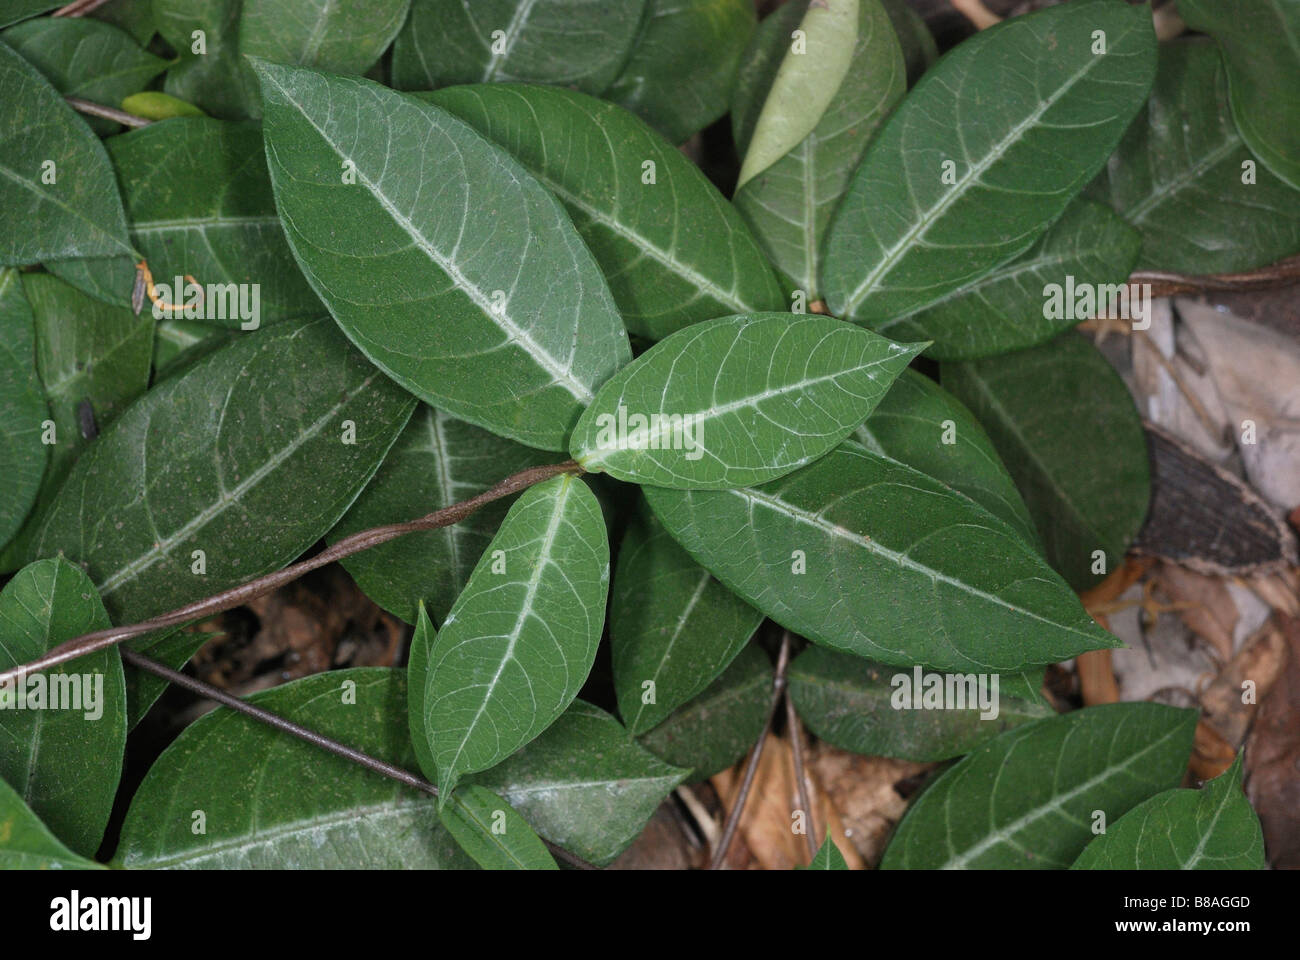 Leaves of Hemidesmus indicus. The roots of this plant are used in Ayurvedic formulations for skin and stomach complaints. Stock Photo